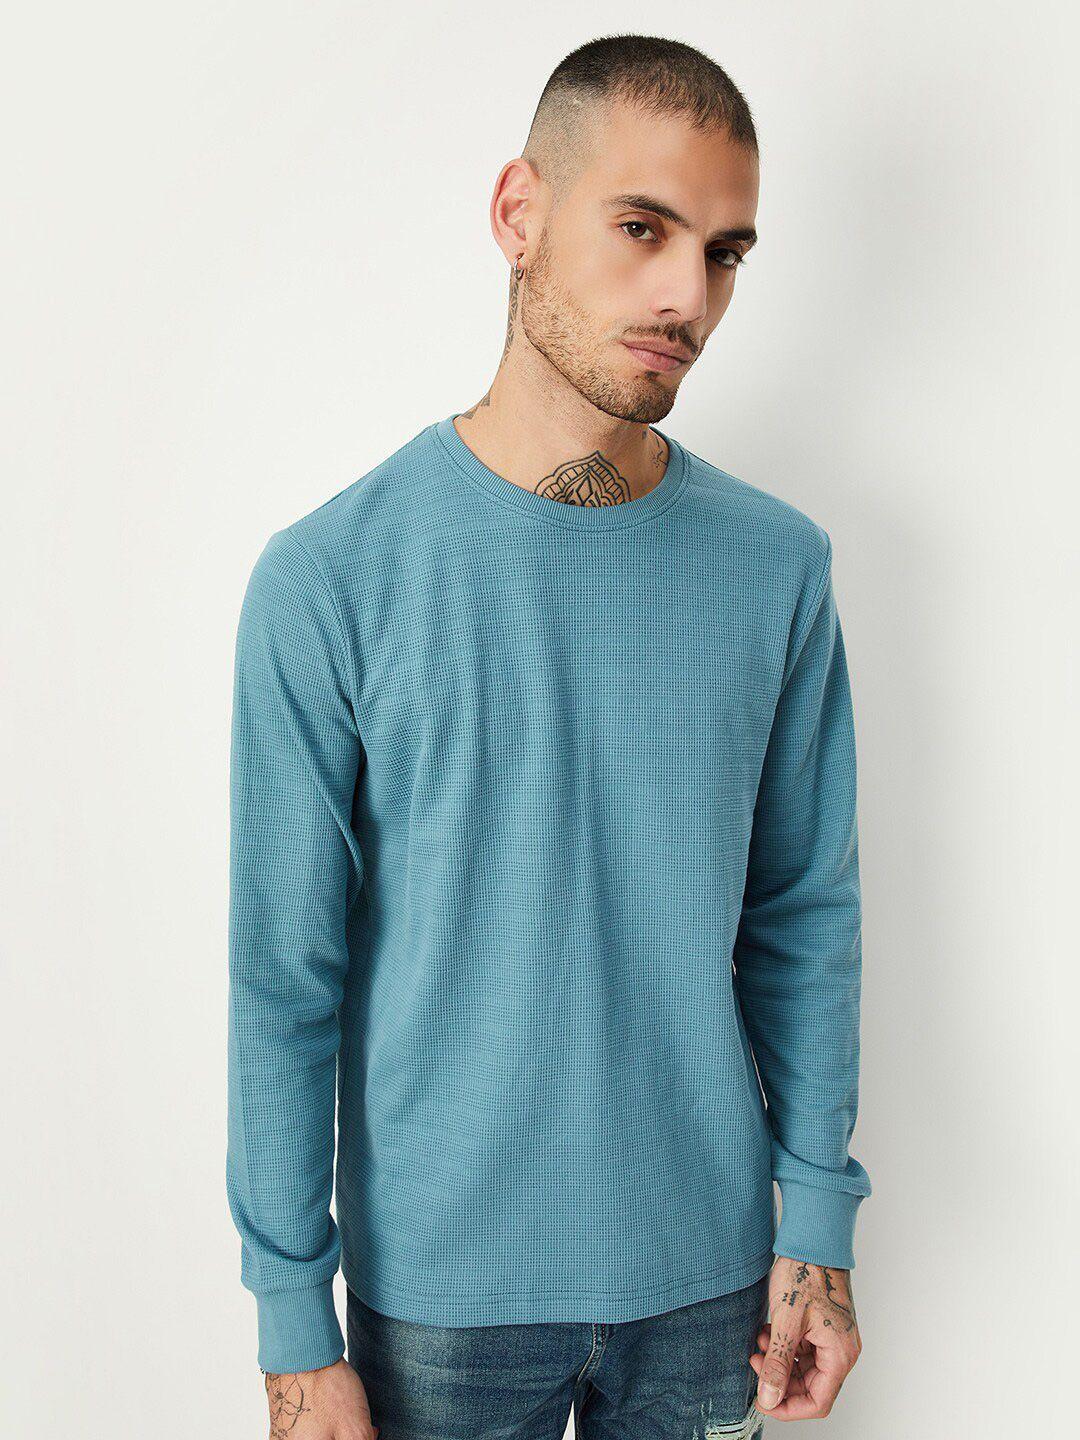 max round neck long sleeves t-shirt